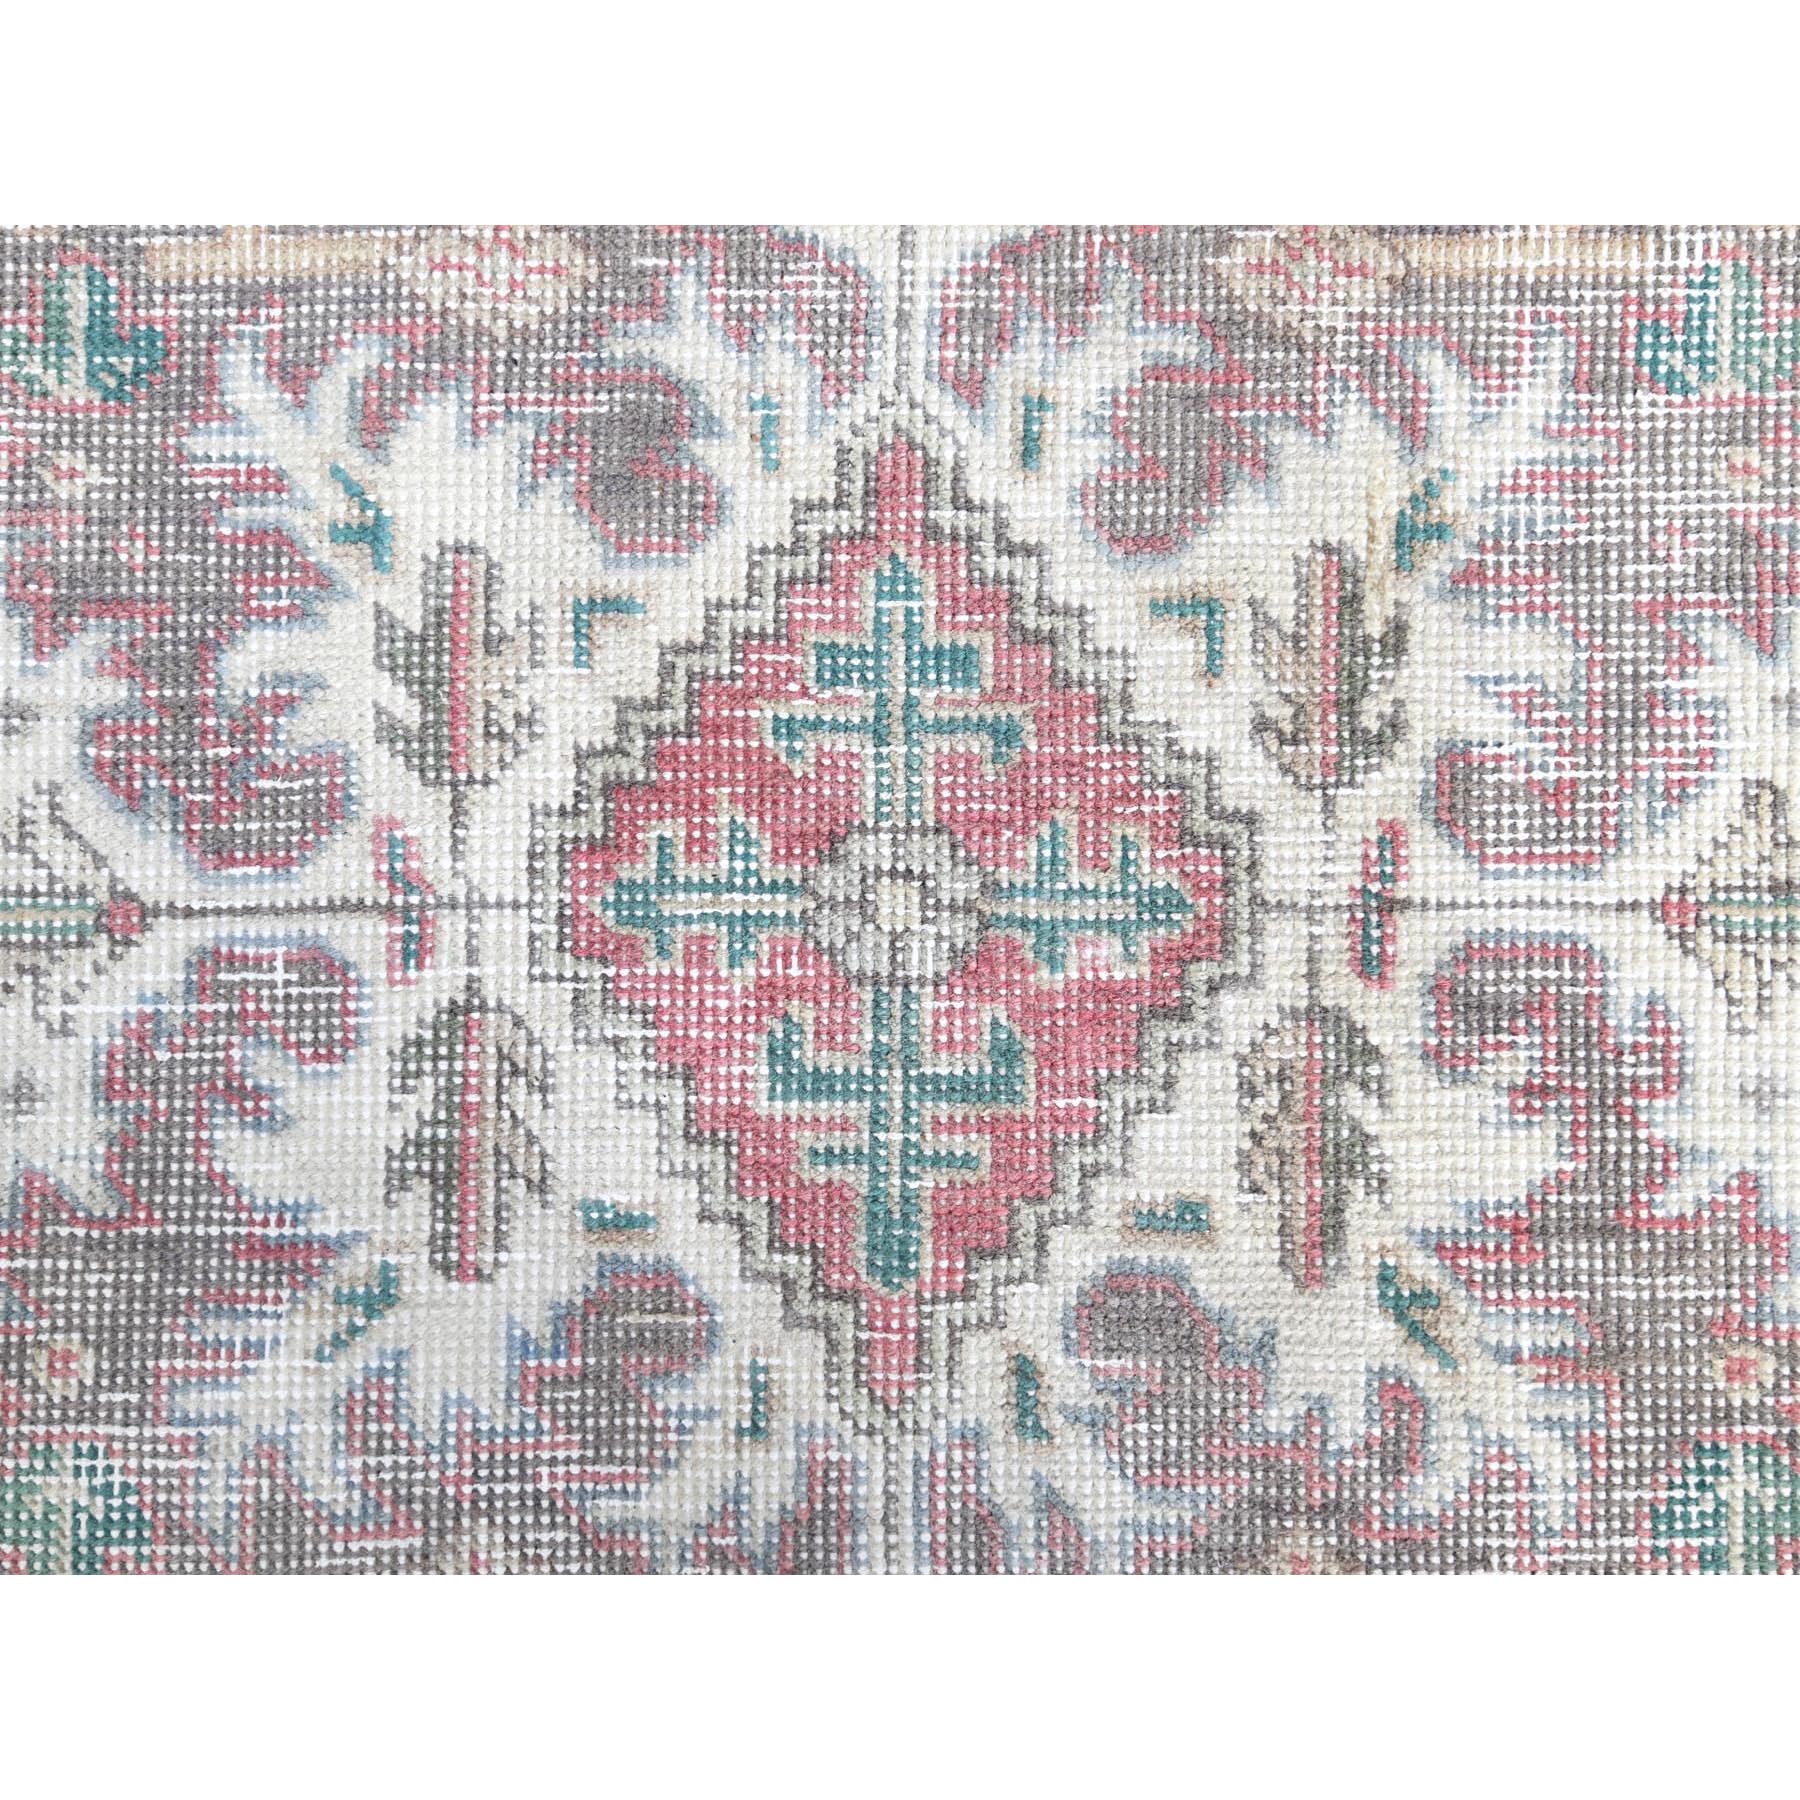 Hand Knotted White Washed Area Rug > Design# CCSR57730 > Size: 6'-6" x 9'-4"